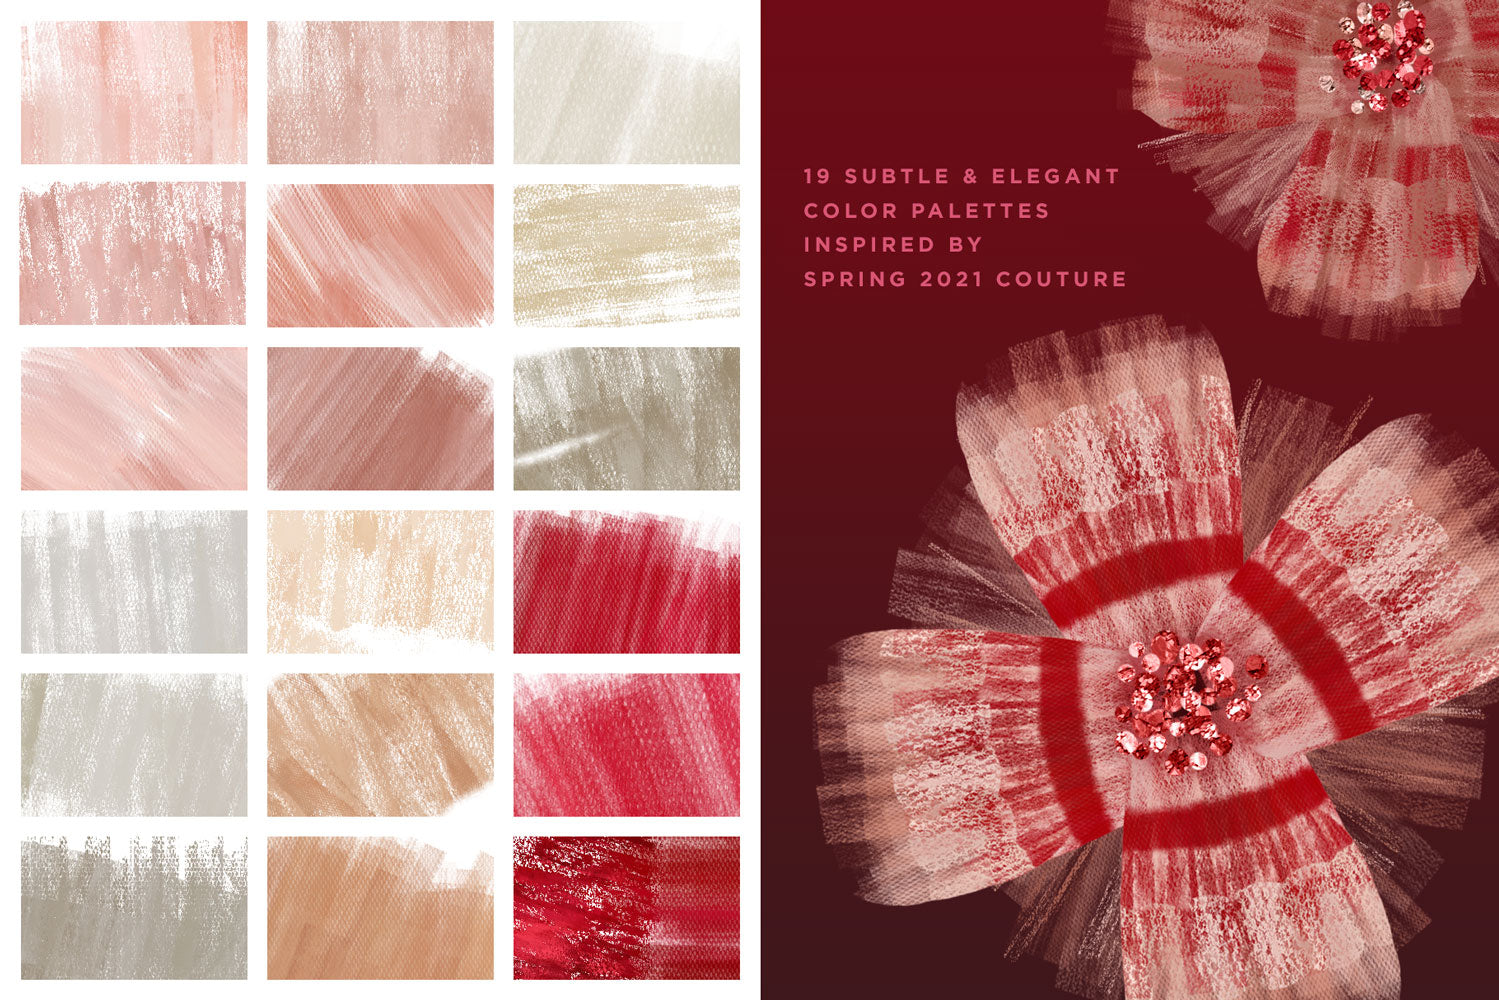 Tulle and organza couture multi-color Photoshop brushes, runway inspired color palettes